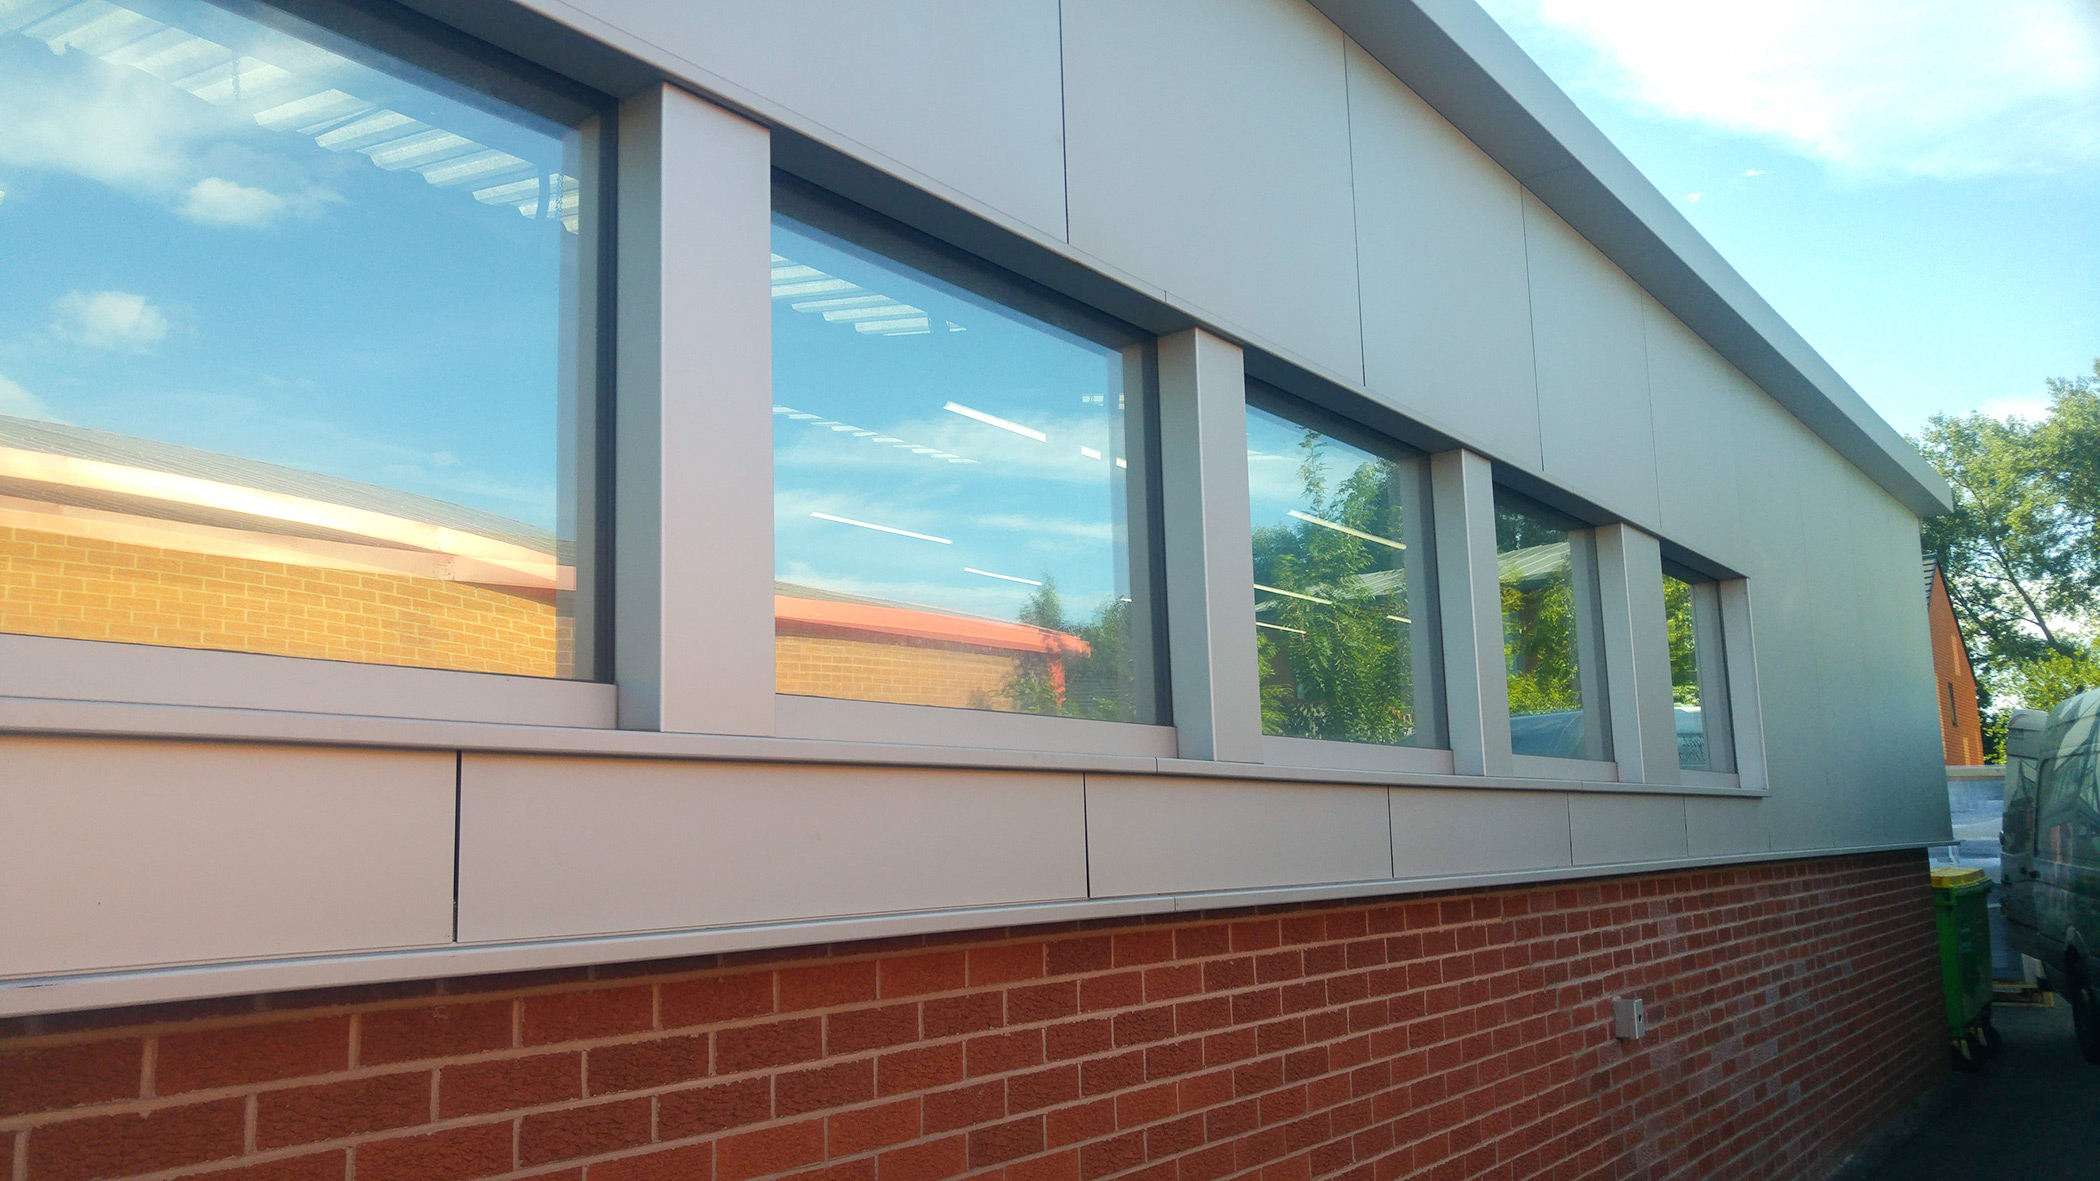 Cladding and window surrounds